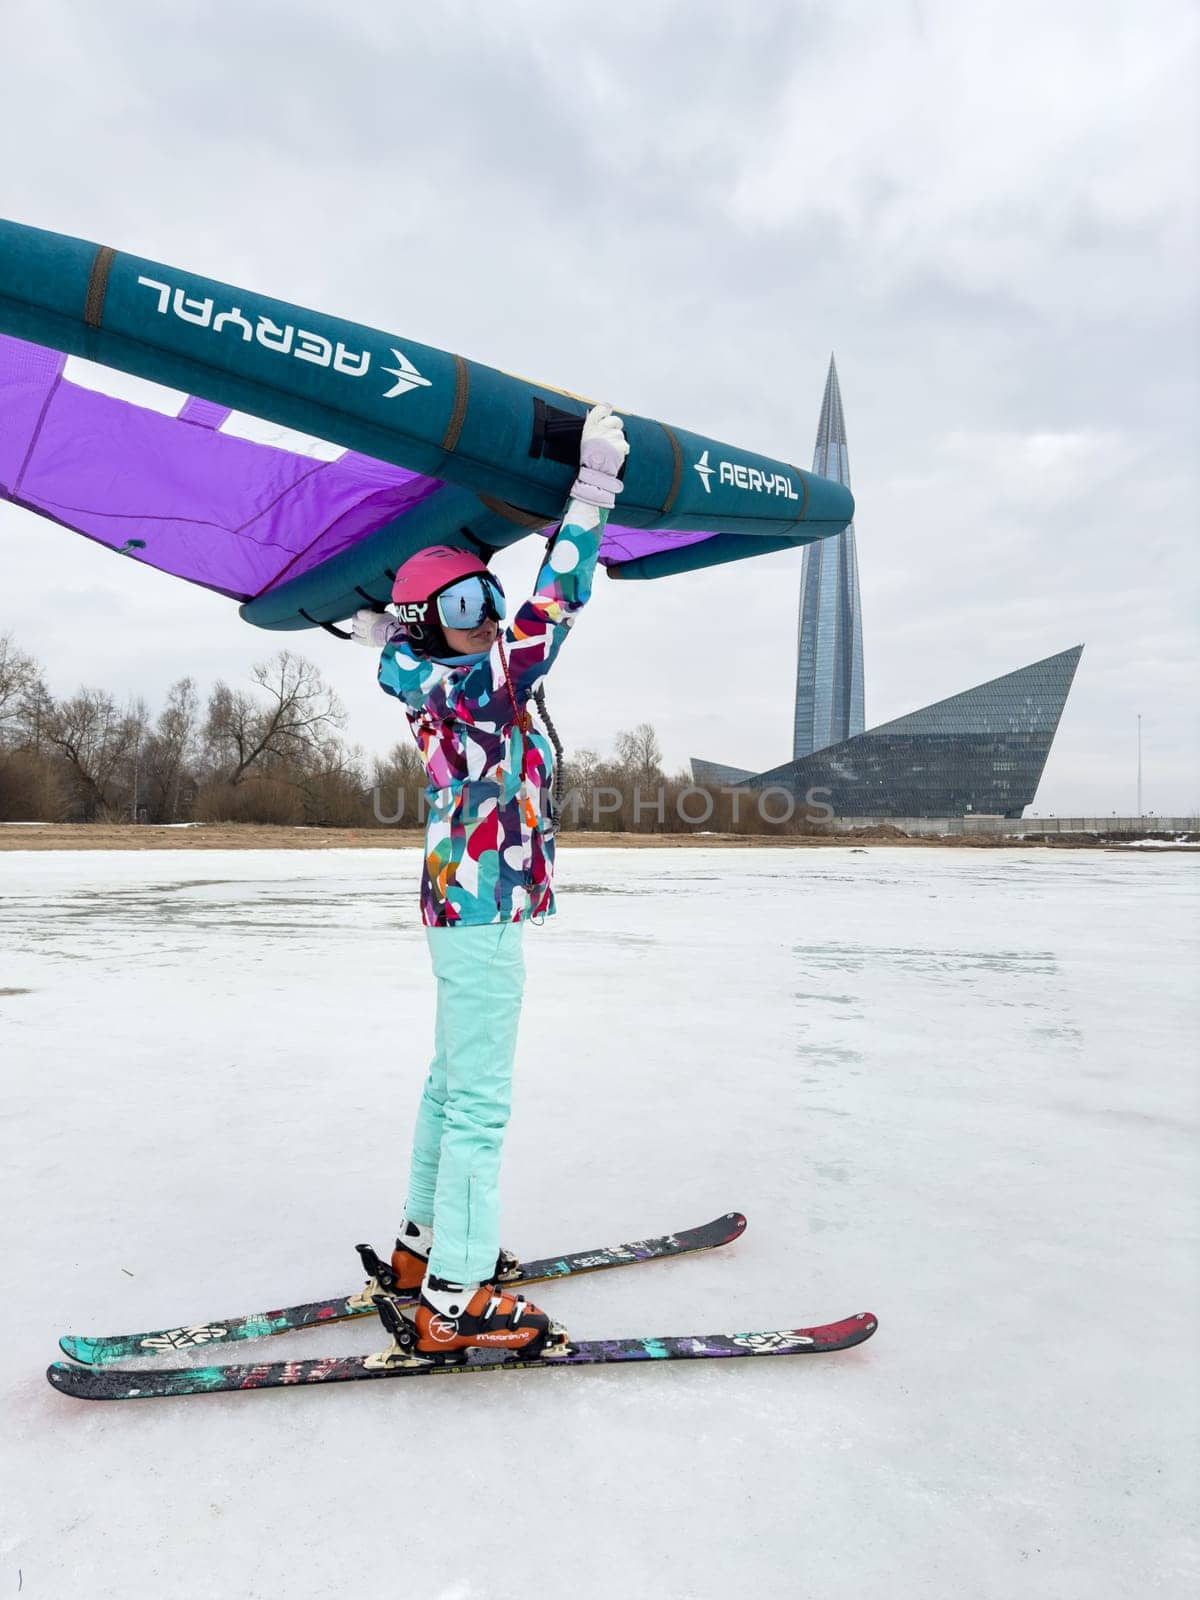 Russia, St.Petersburg, 14 March 2024: A girl in bright colored ski gear is ready to ski on ice with an air wing at cloudy weather, the Lakhta Center skyscraper in the background, helmet and glasses by vladimirdrozdin